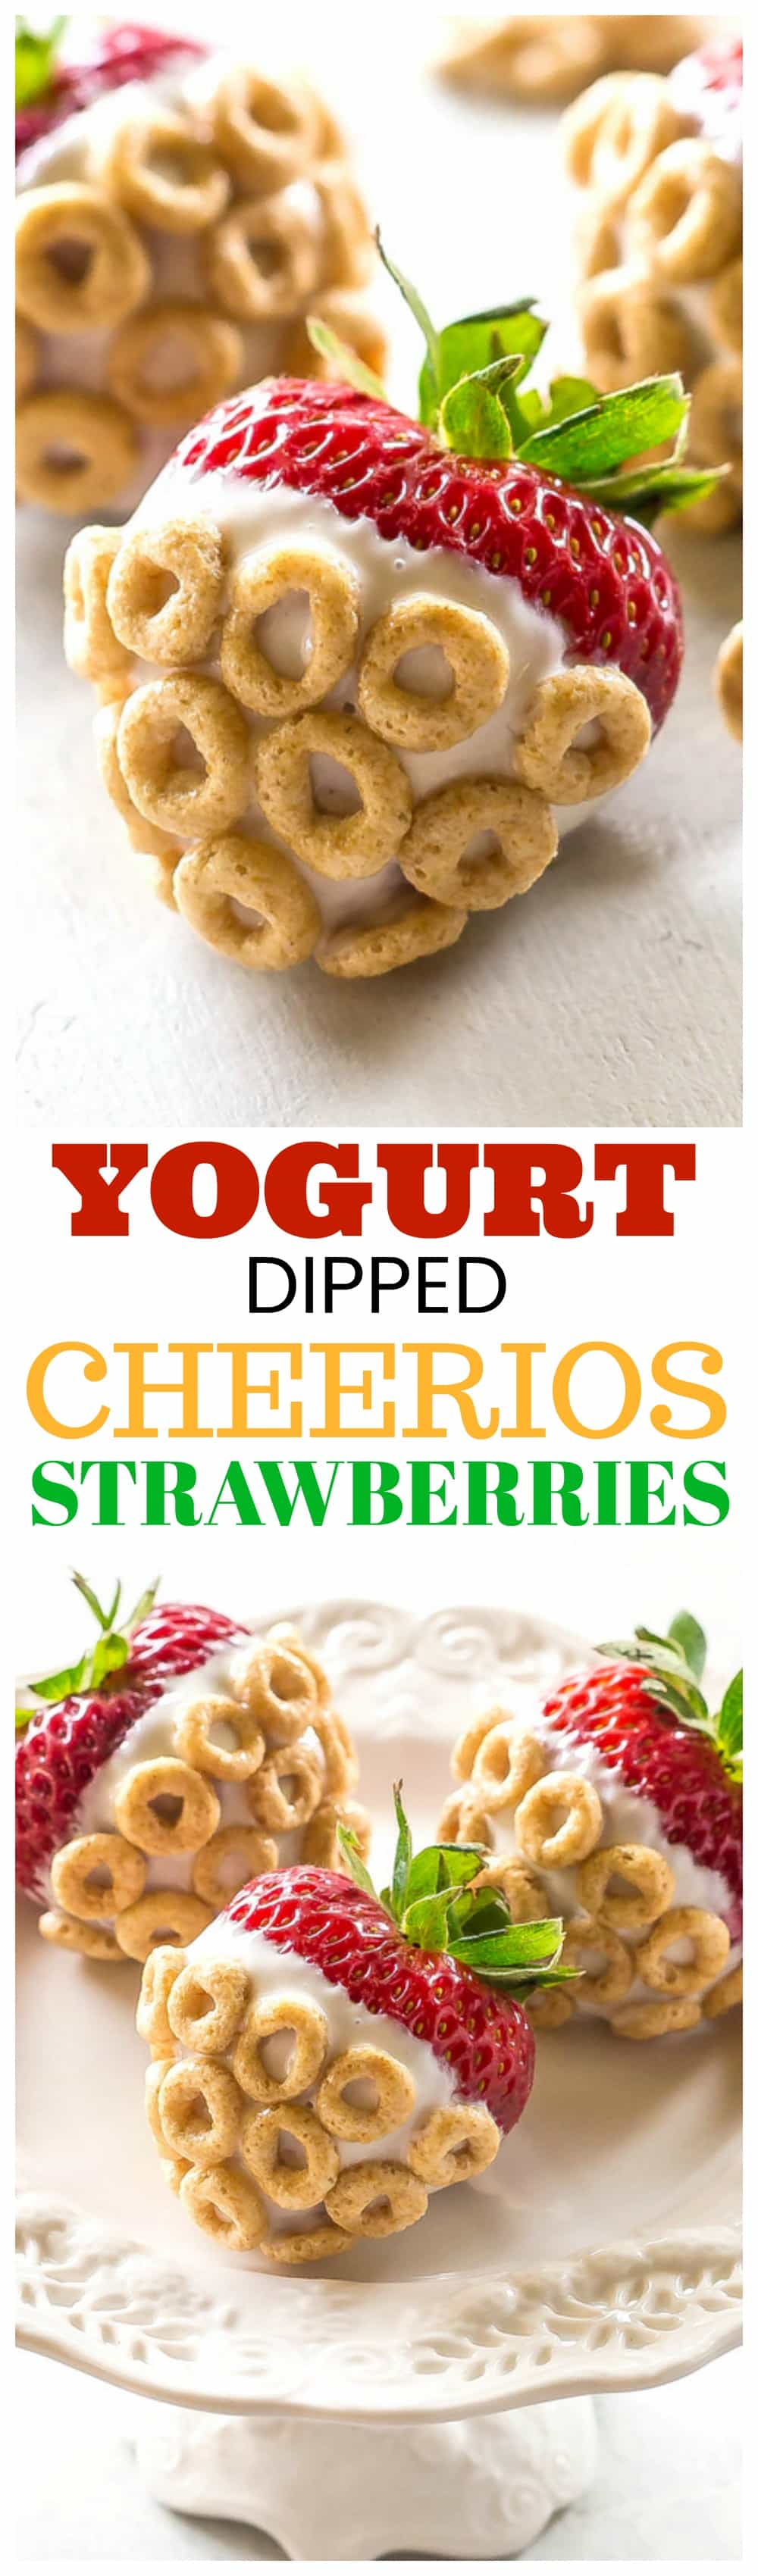 Is anyone else in a need of a summertime snack for their kids? These Yogurt-Dipped Cheerios Strawberries are a healthy snack for those hot summer days. #sponsored